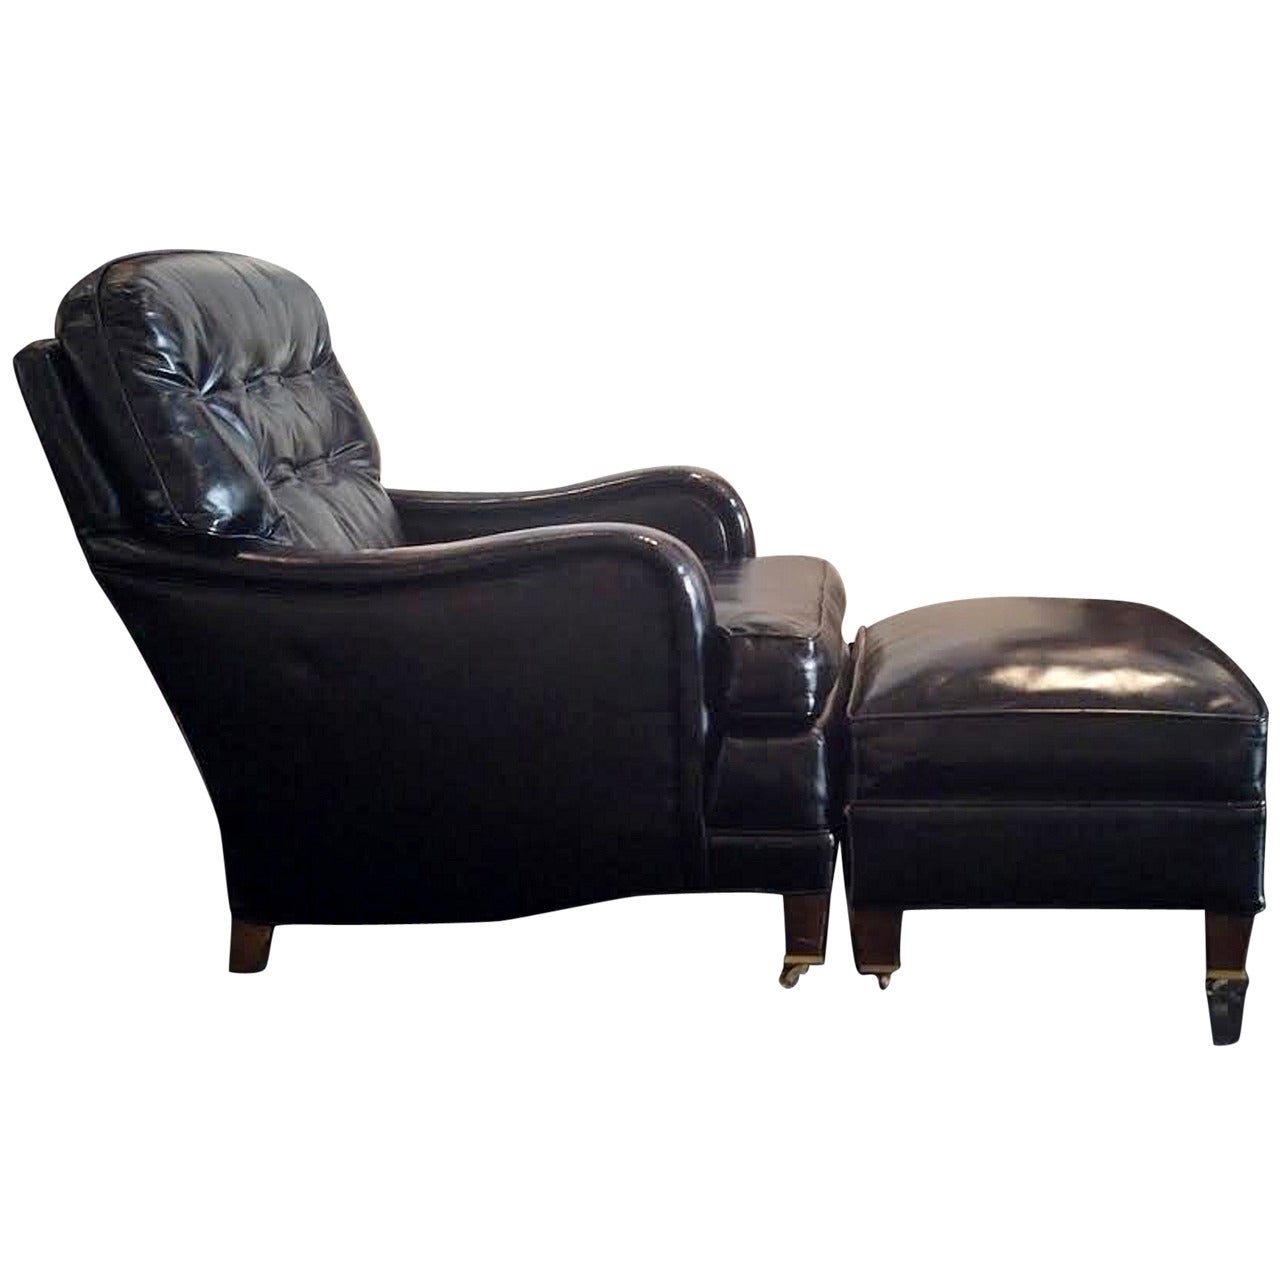 American Art Deco Leather Club Chair and Ottoman